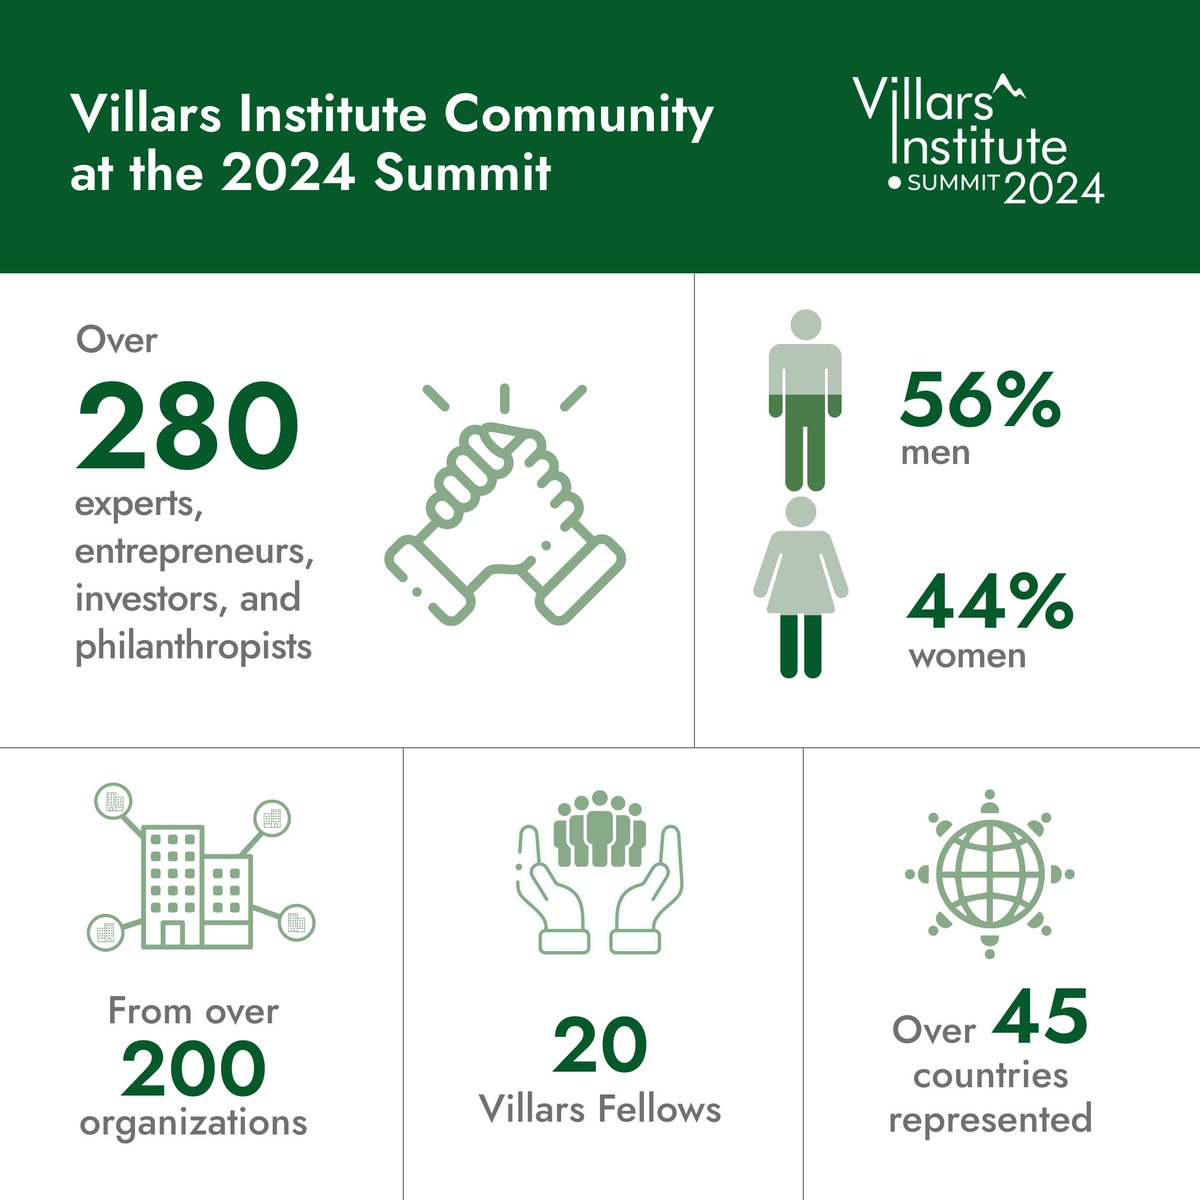 We're bringing together diverse groups of experts, entrepreneurs, investors and philanthropists for our 2024 #VillarsSummit 🙌
 
280+ leaders from 45+ countries will explore how #InterdisciplinaryCollaboration and #SystemThinking can help solve our 🌏’s biggest challenges